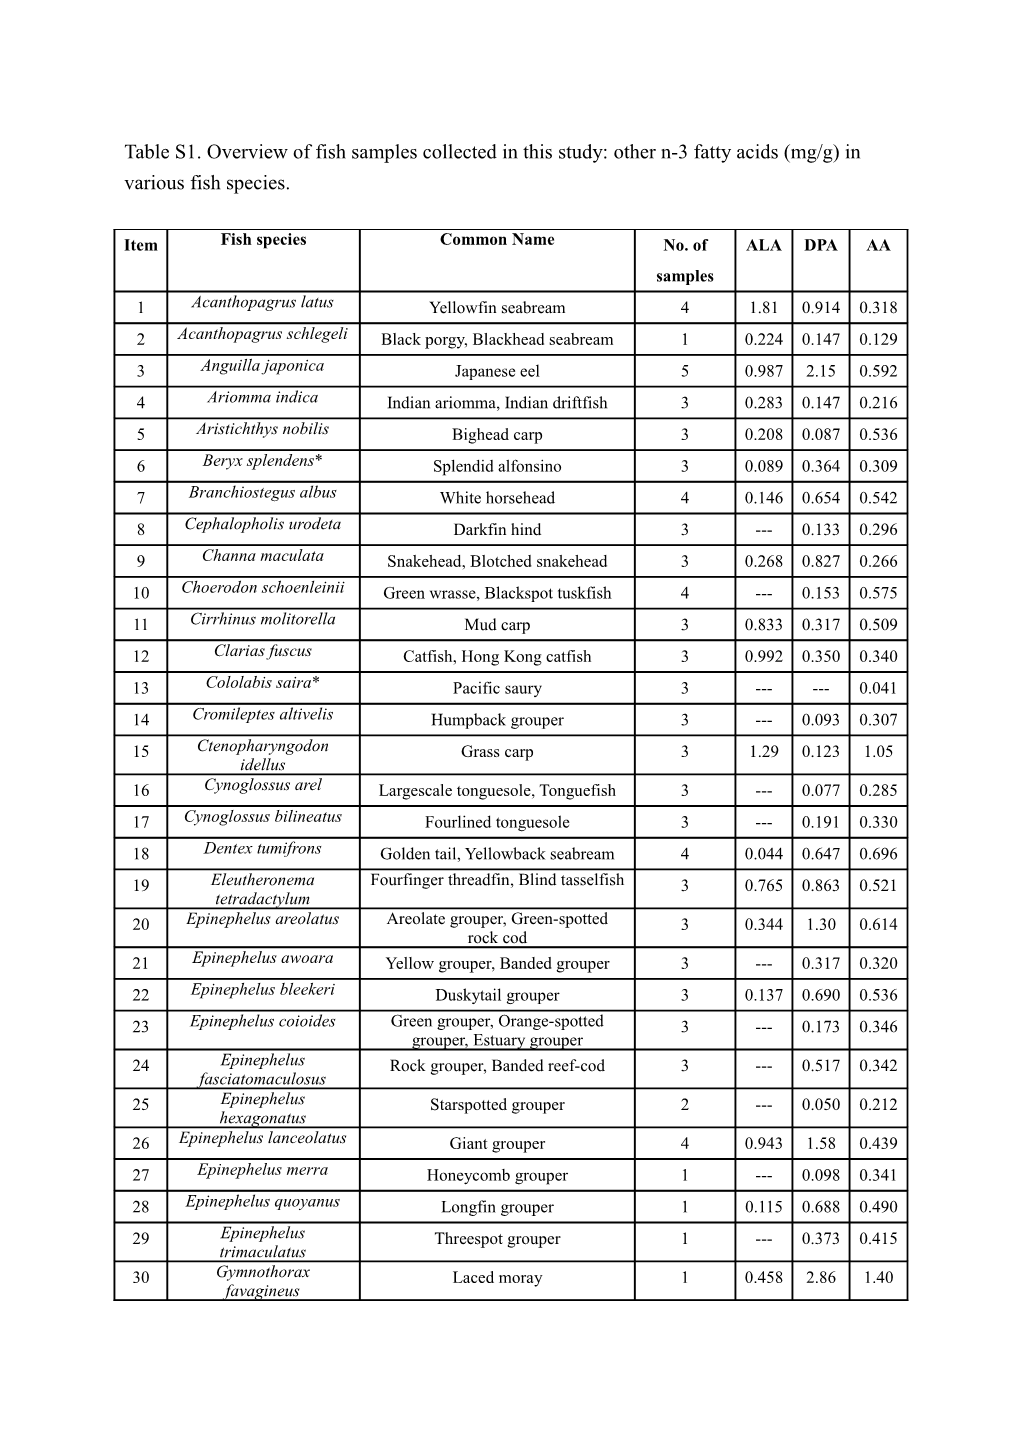 Table 1 Overview of Fish Samples Collected in This Study: Thg, Mehg Concentrations (Μg/G)